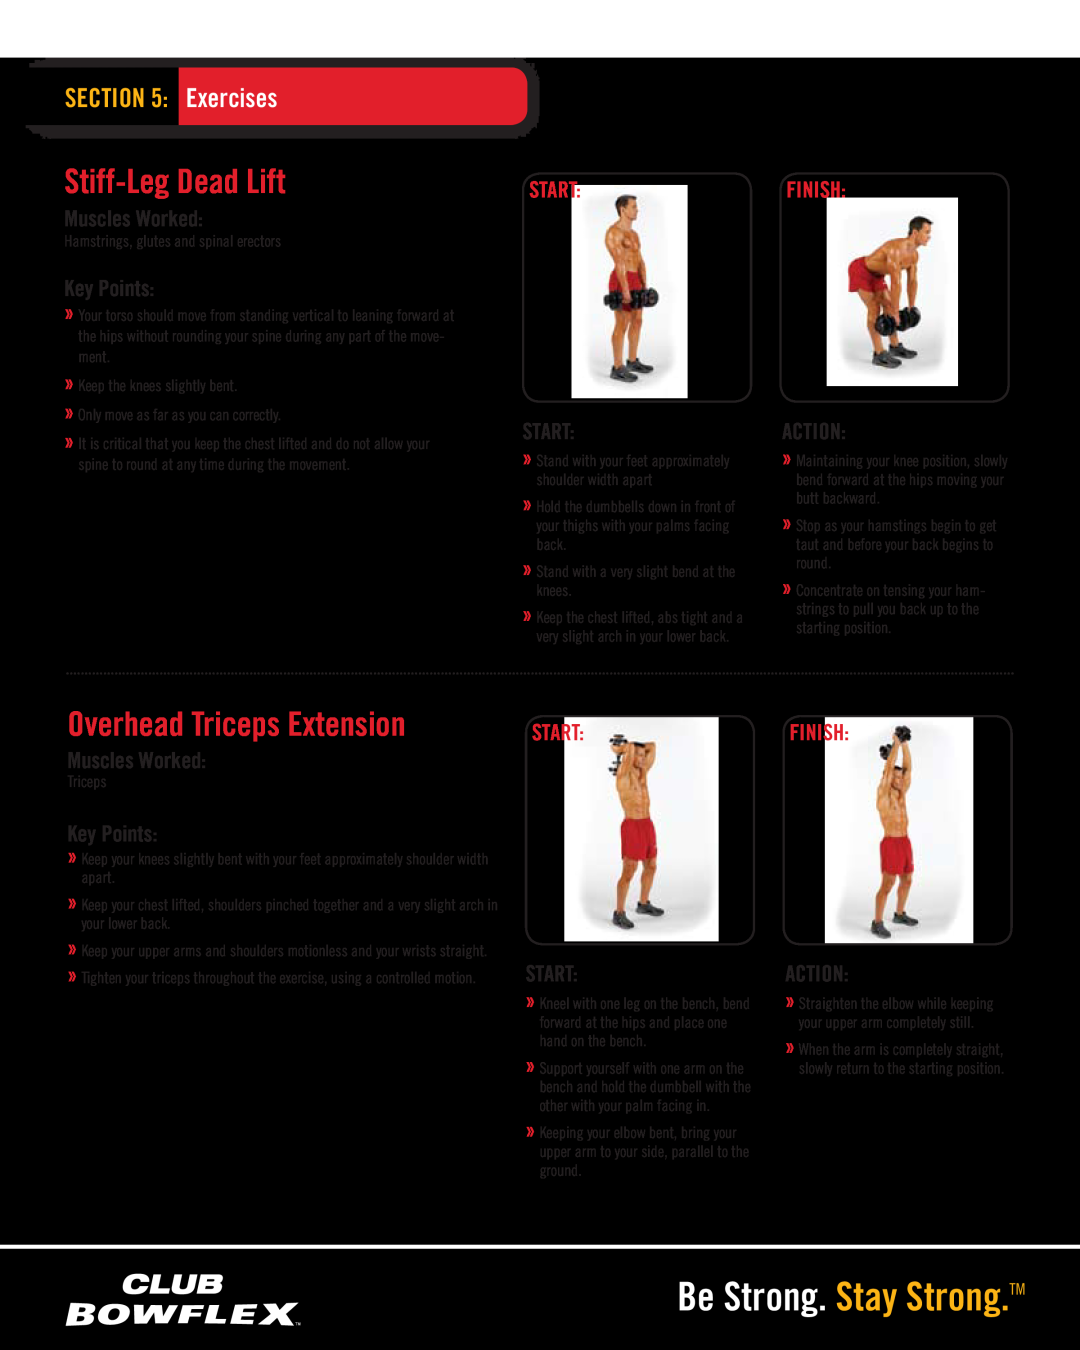 Bowflex 552 Stiff-Leg Dead Lift, Overhead Triceps Extension, Exercises, Be Strong. Stay Strong.TM, Muscles Worked, Start 